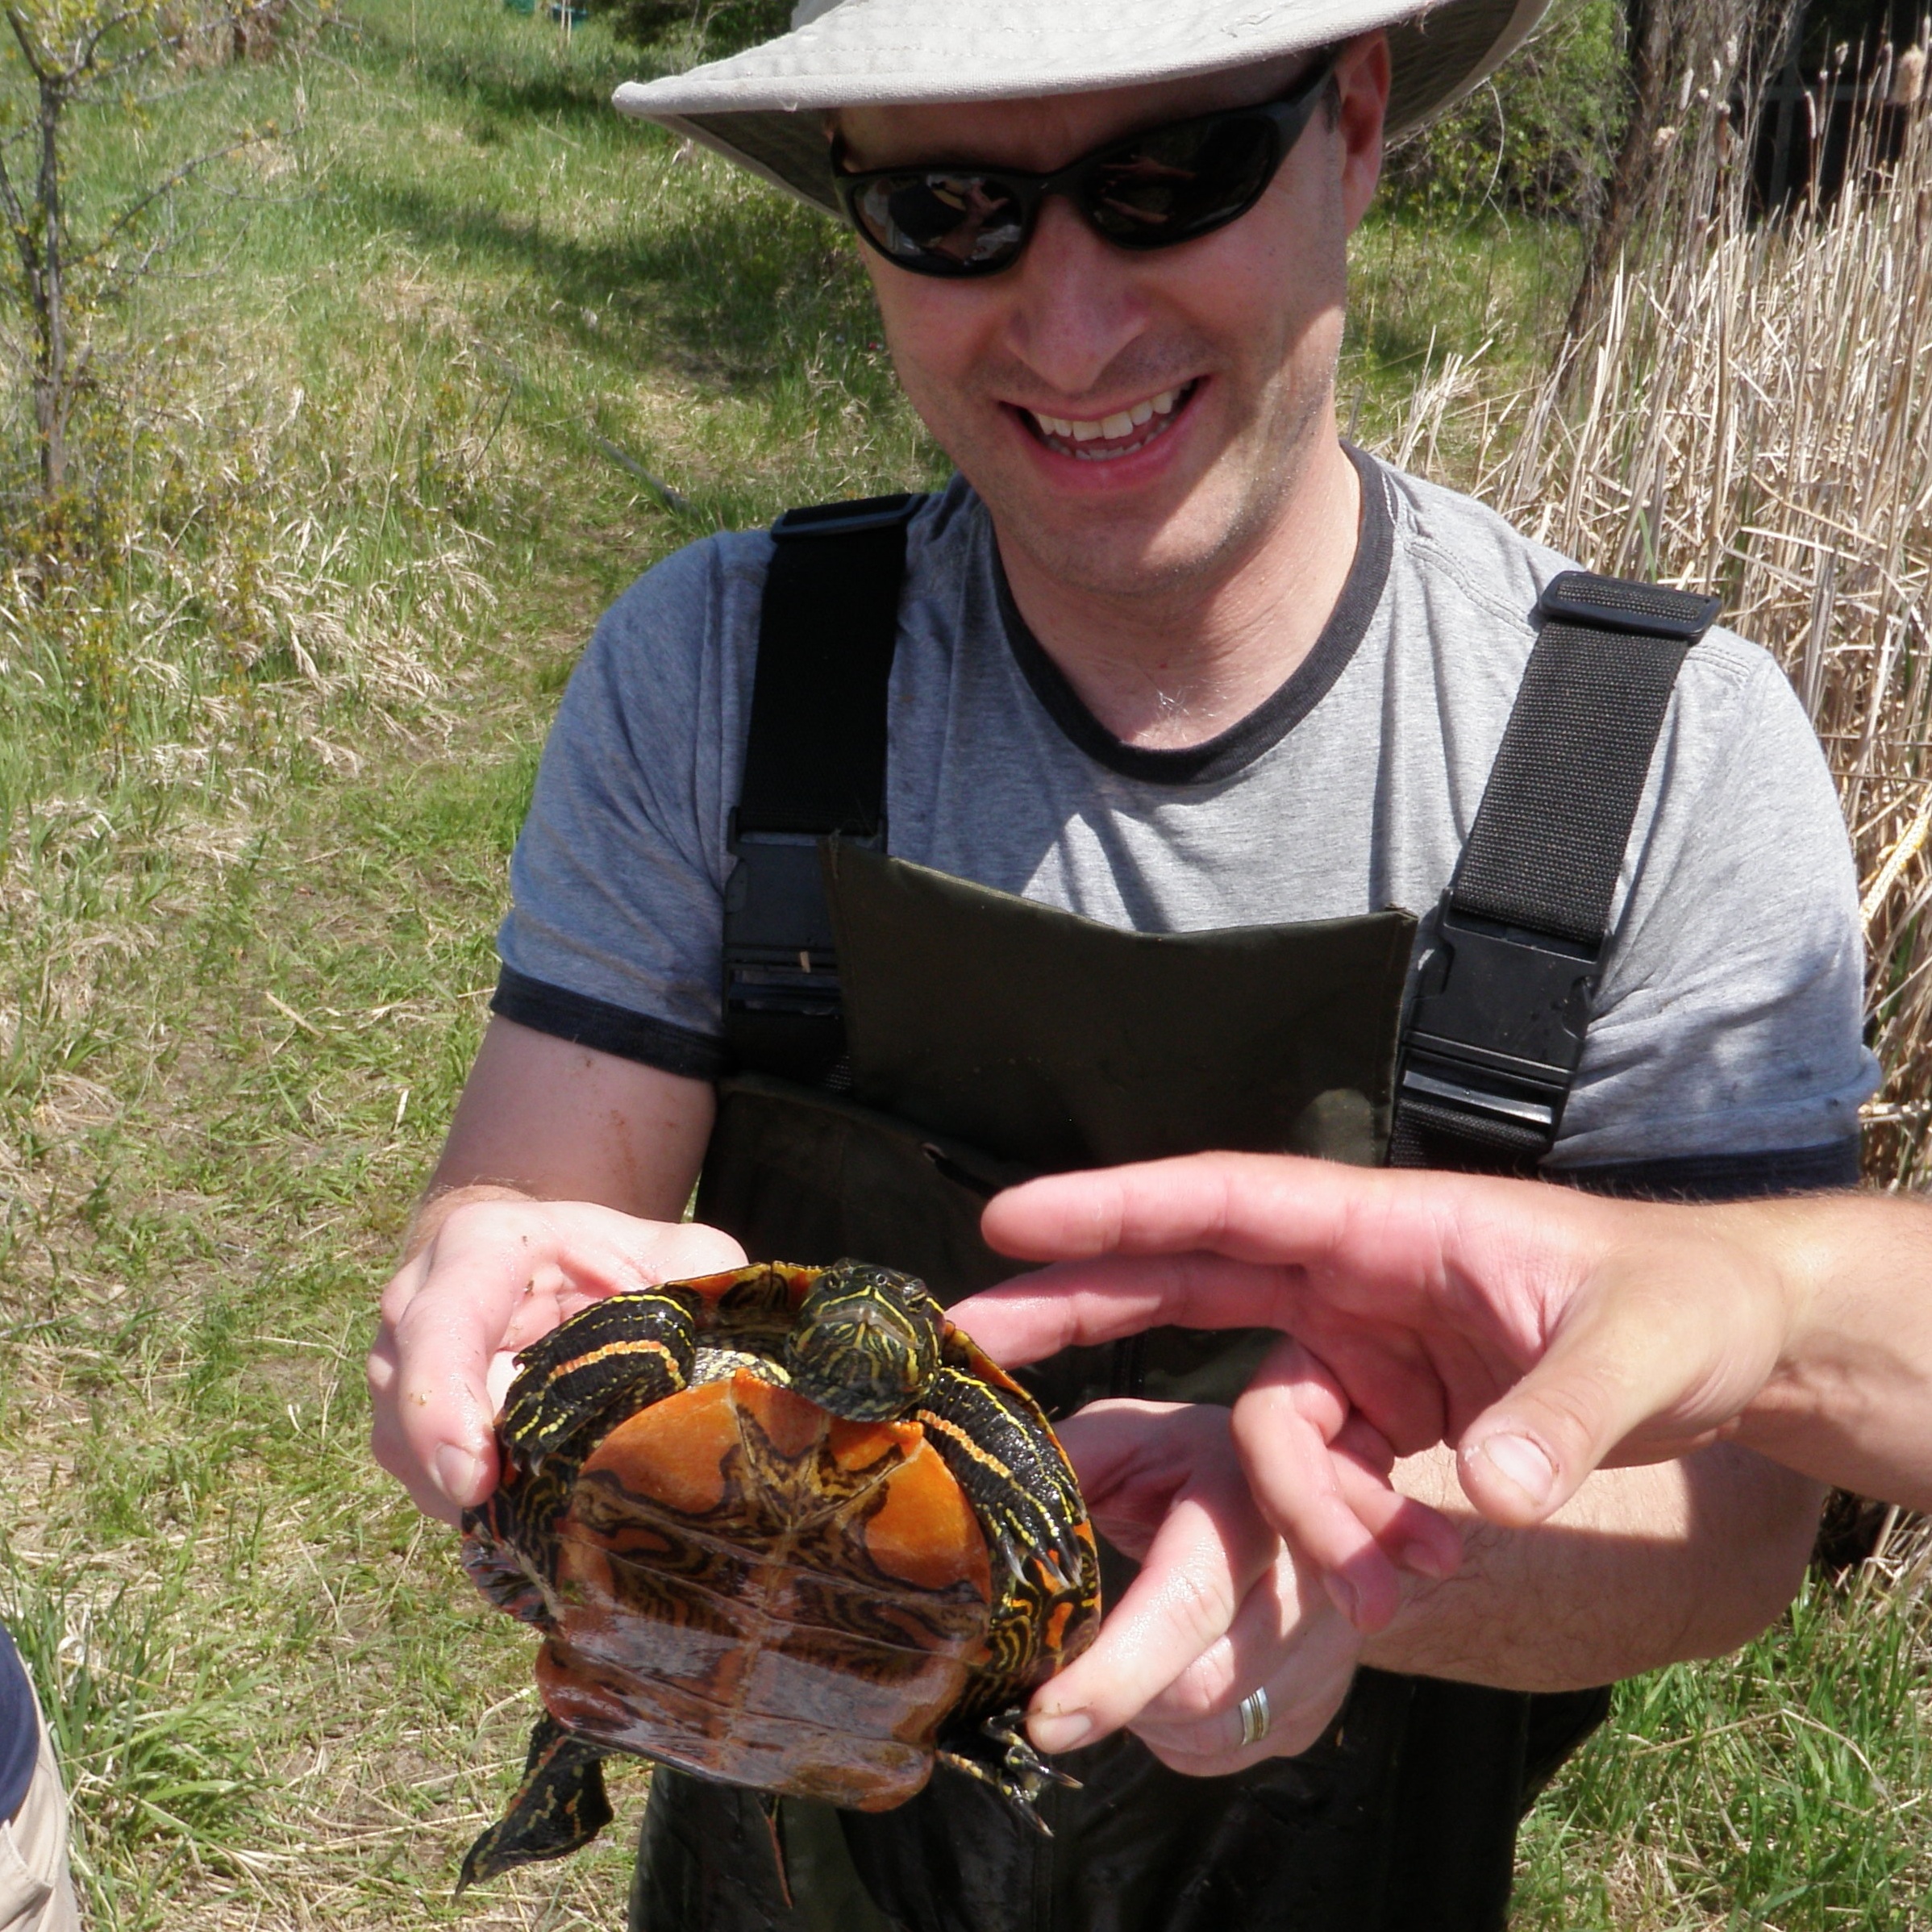 Jesse showing off a turtle at a local pond.